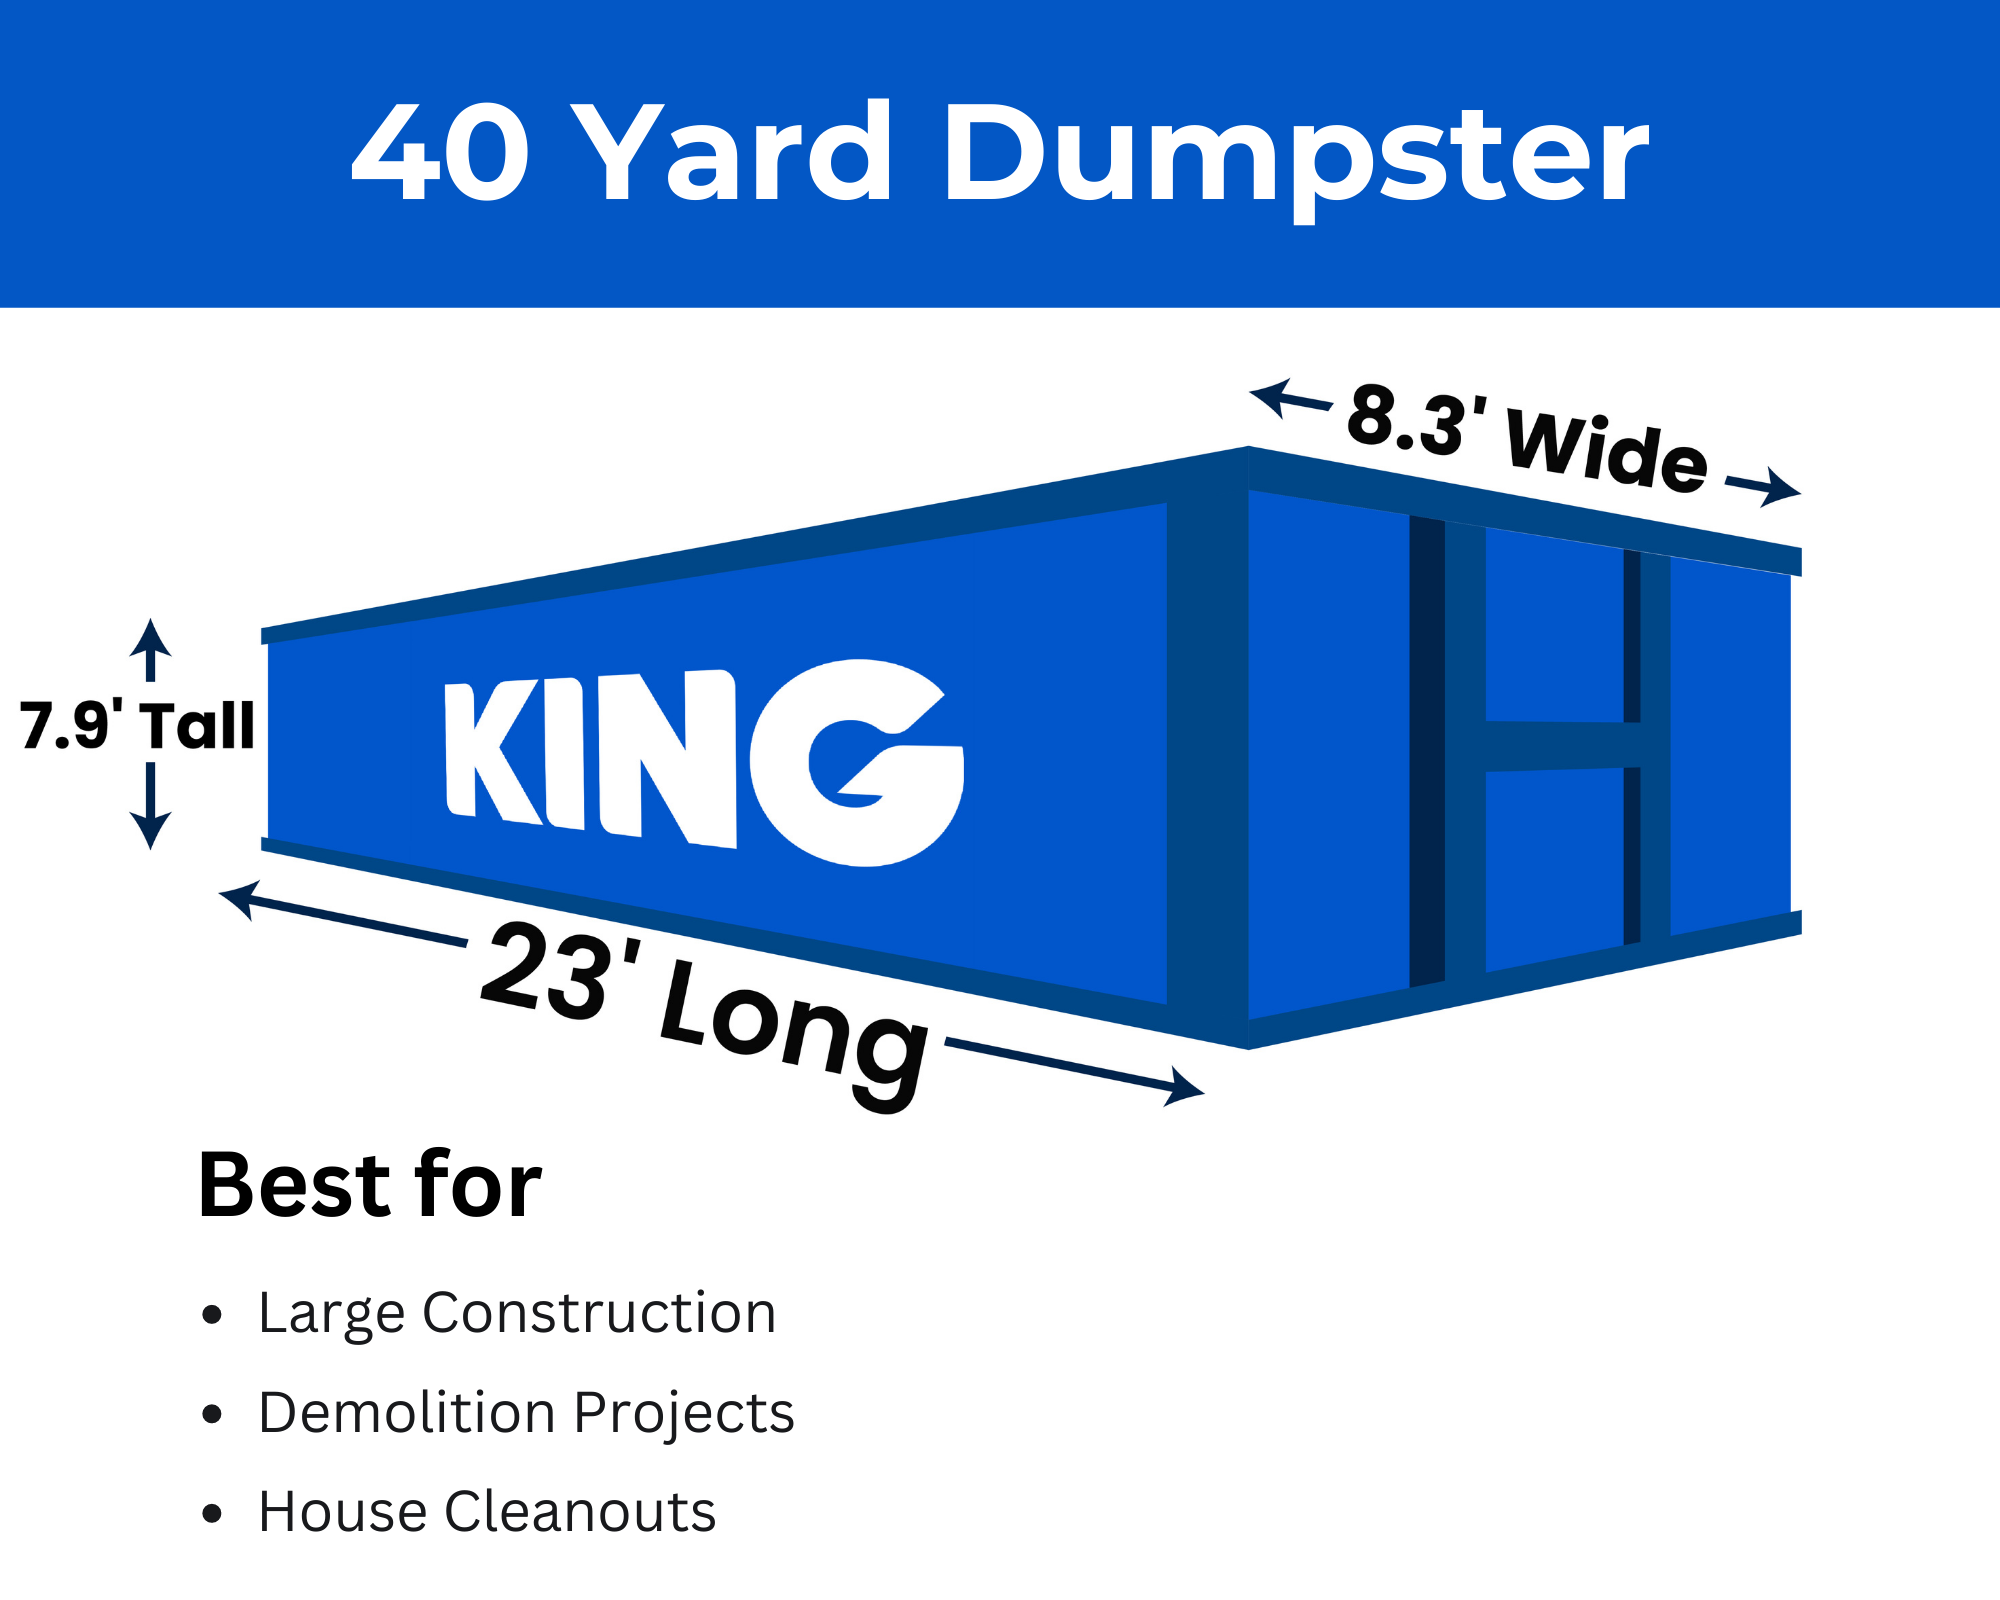 40 yard dumpster graphic best for uses